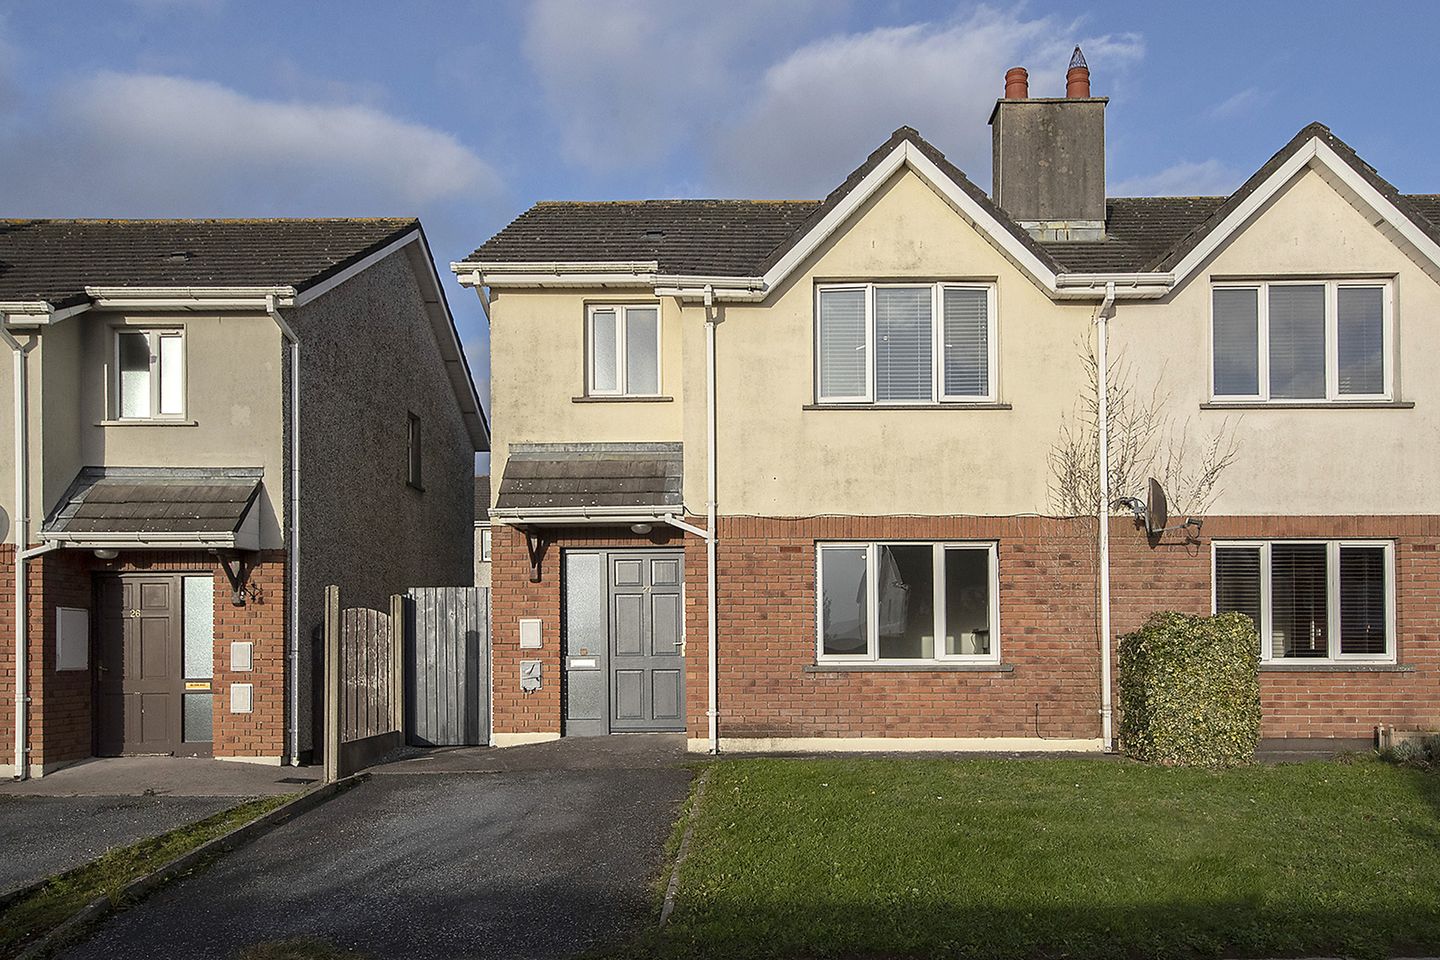 27 Town Court, Dungarvan, Co. Waterford, X35VW27